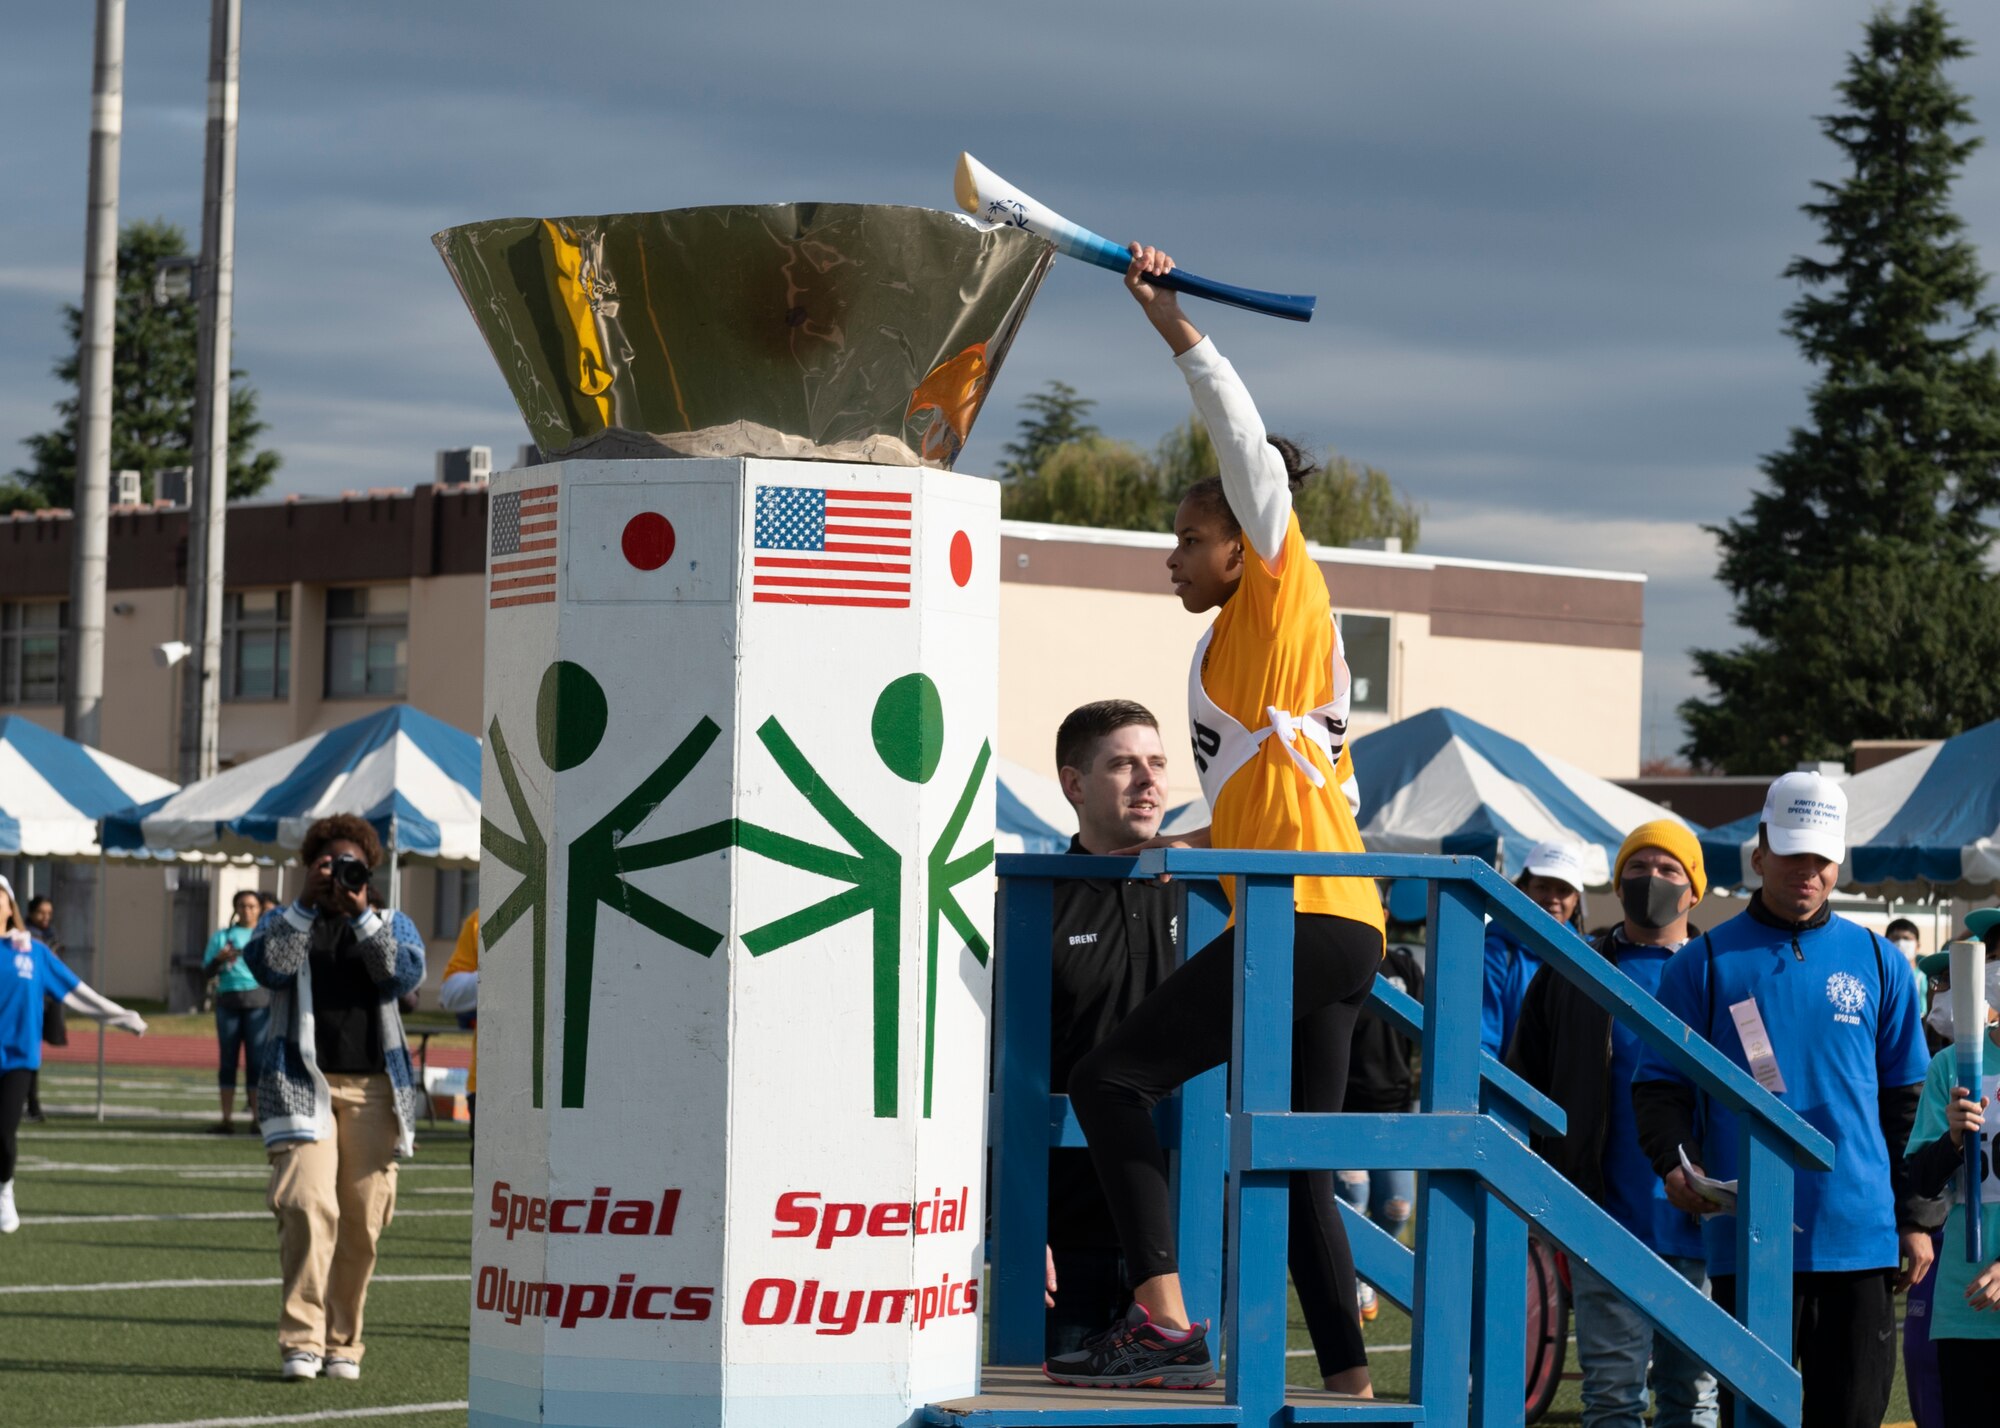 A Special Olympic athlete lights a mock torch